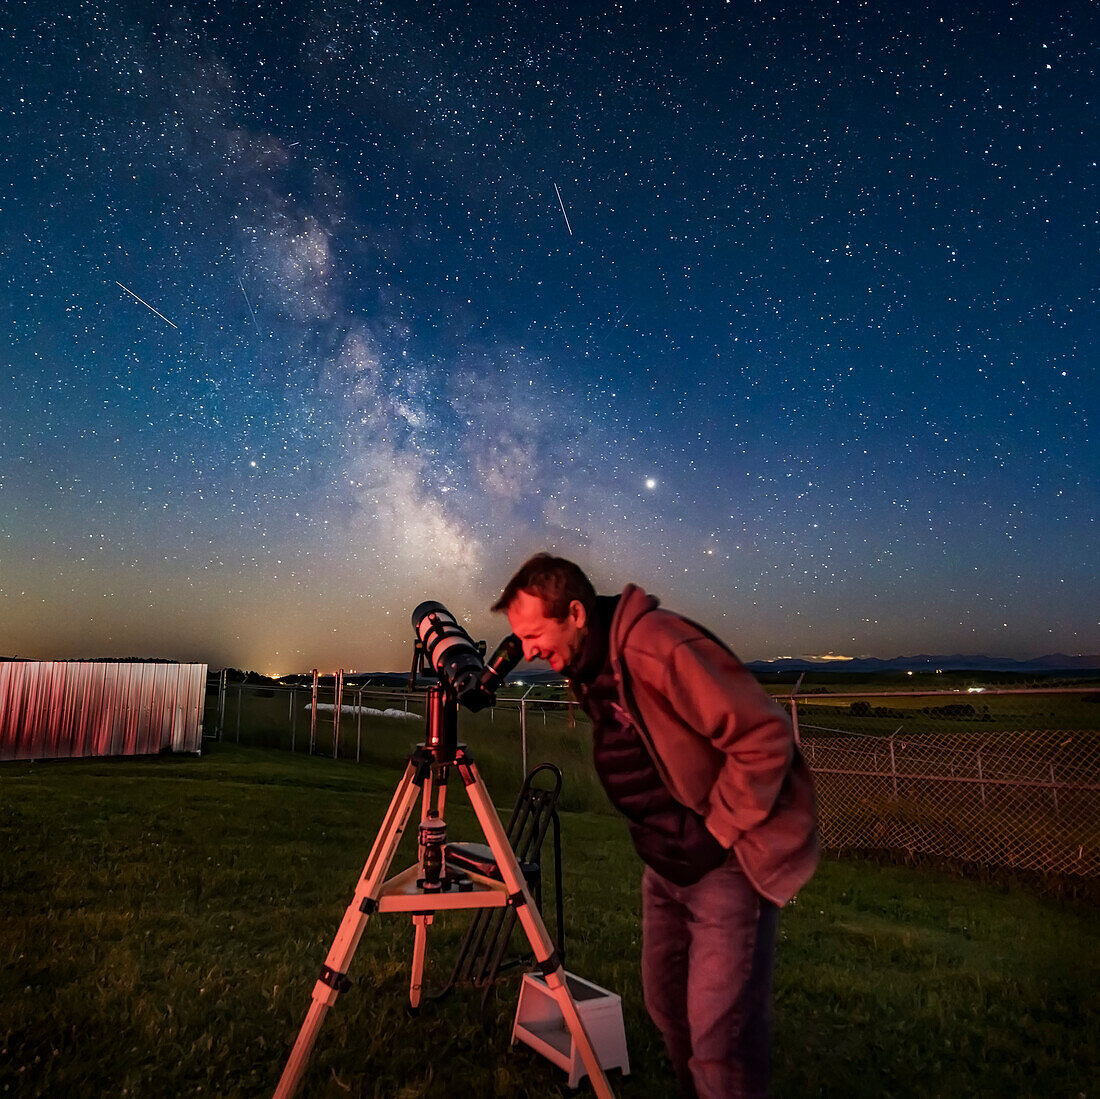 Mark gazing at a target, M22, in the Milky Way with his TeleVue 127 refractor at the annual Rothney Observatory Milky Way Nights for July 25, 2019. Several satellite trails mark the sky. Jupiter (brightest at right) and Saturn (at left) flank the Milky Way.